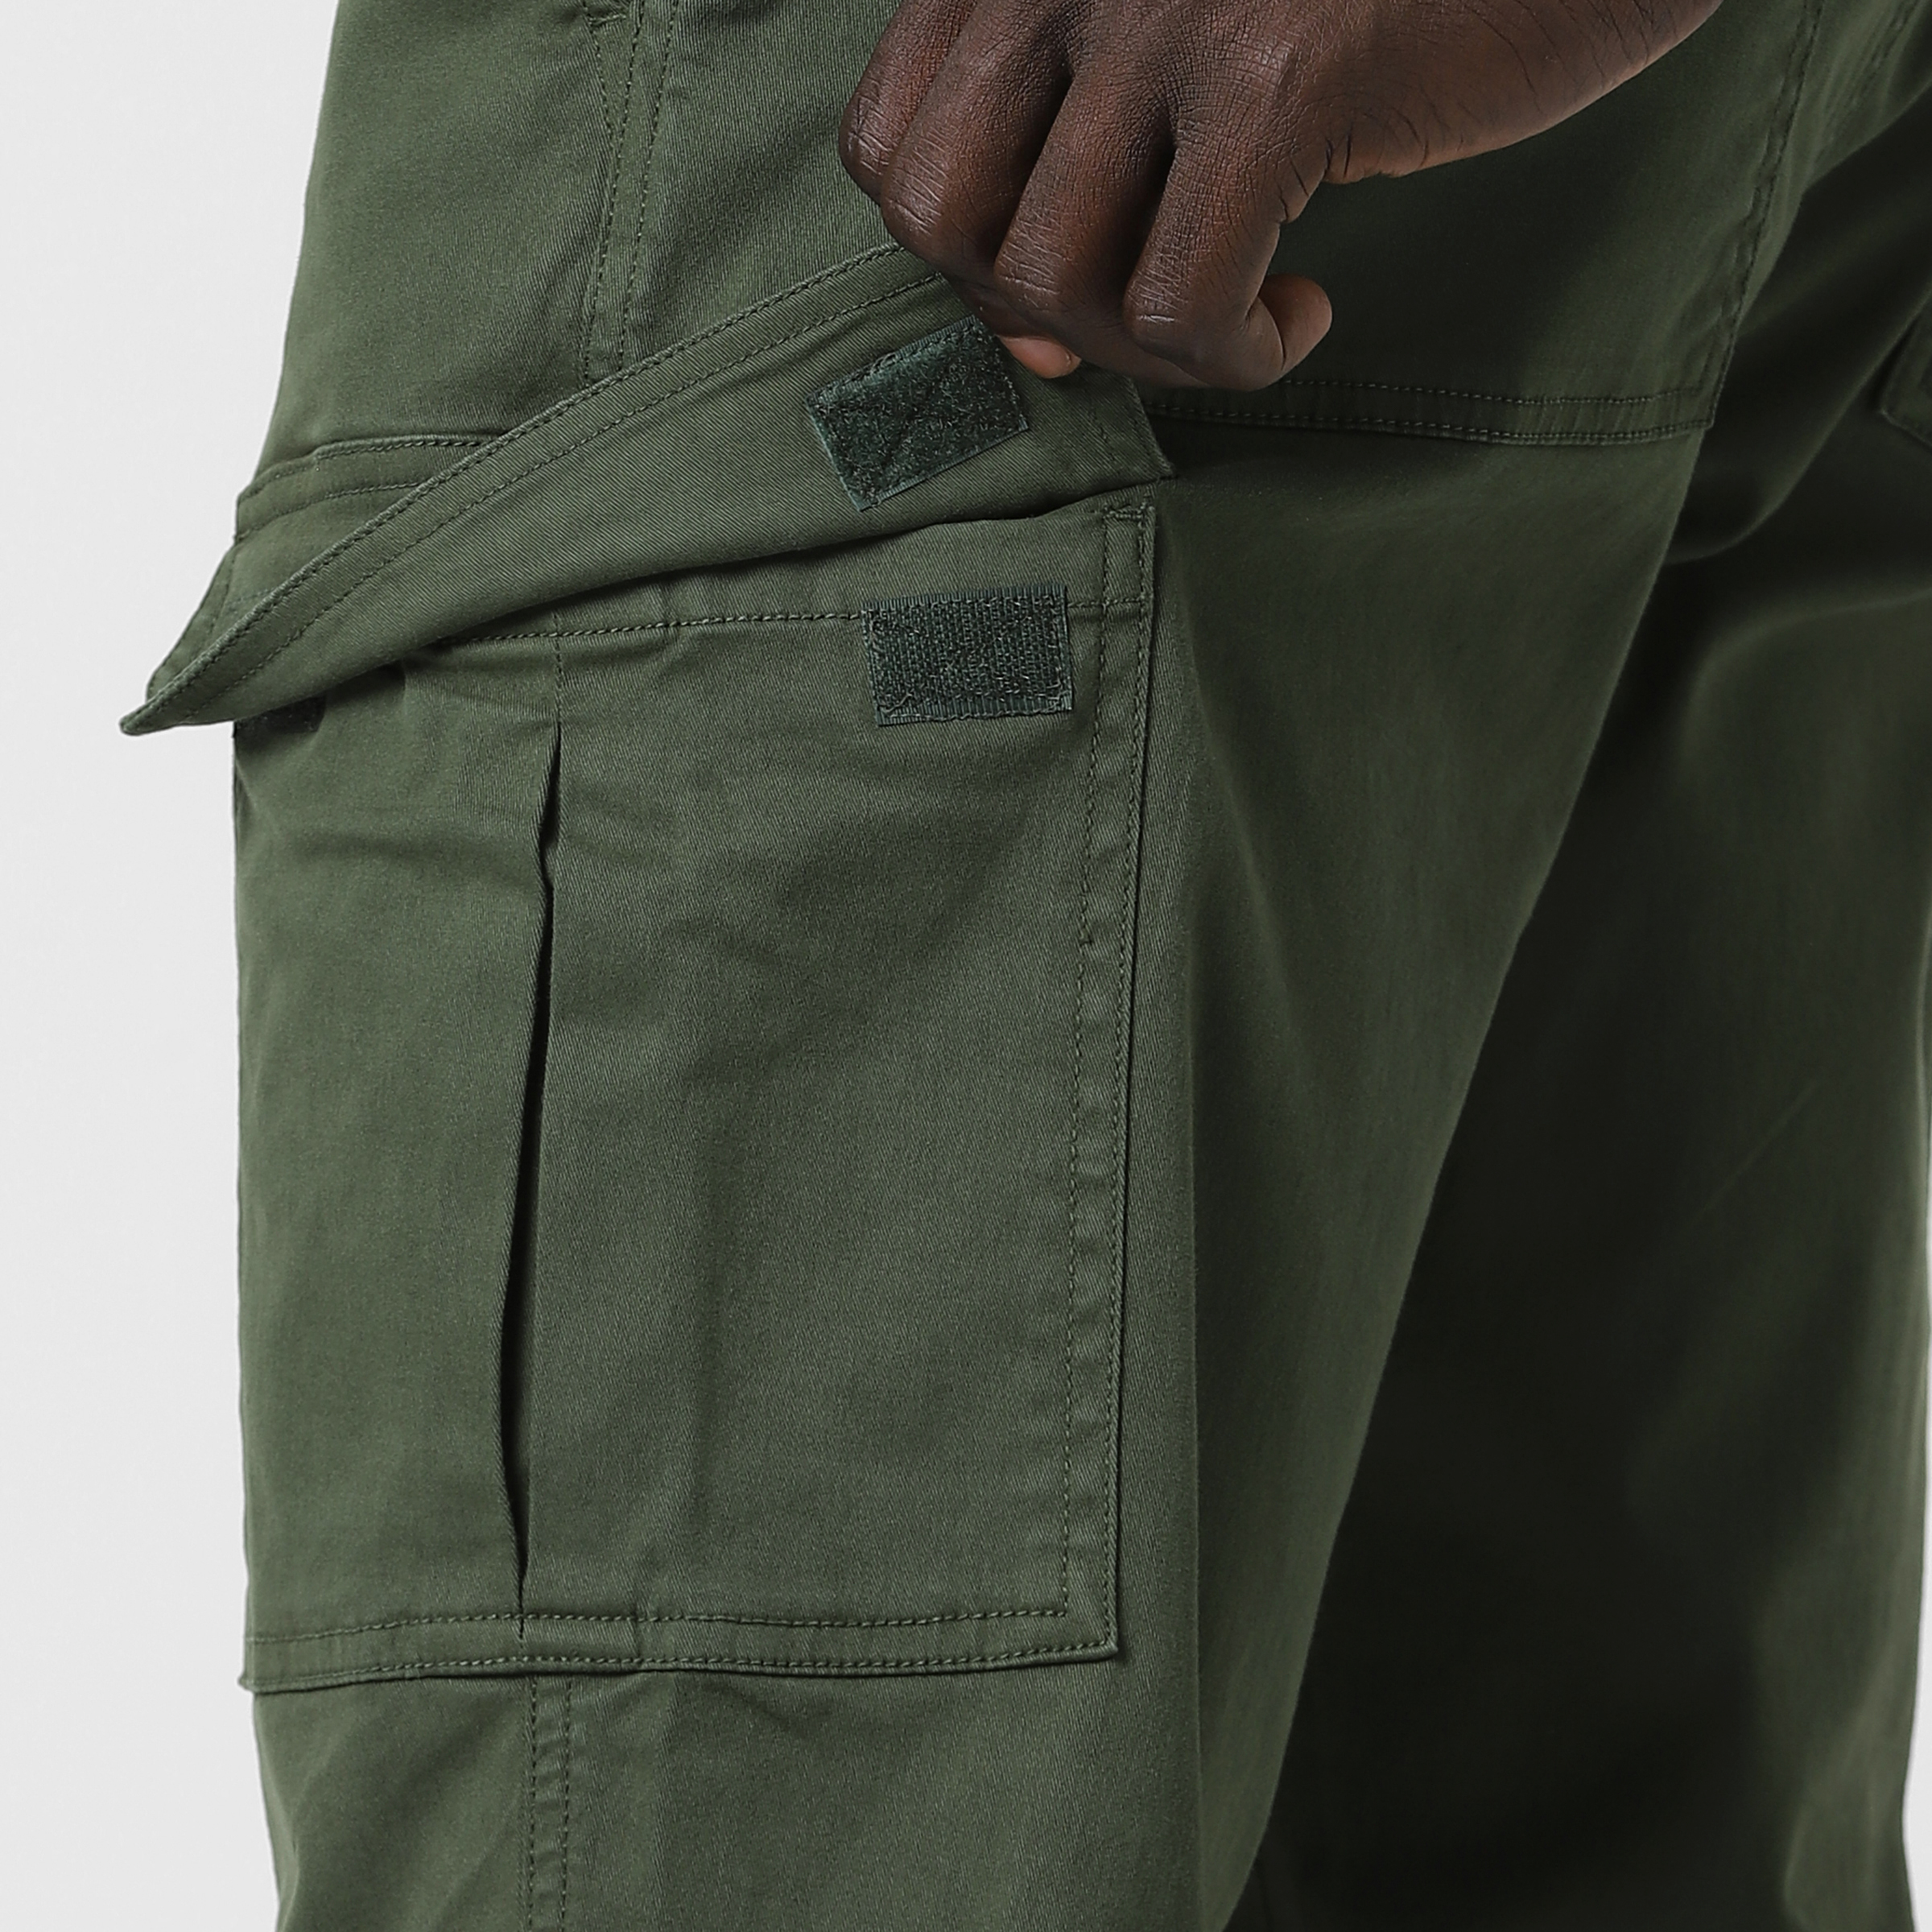 Stretch Cargo Pant Military Green close up left velcro pocket open